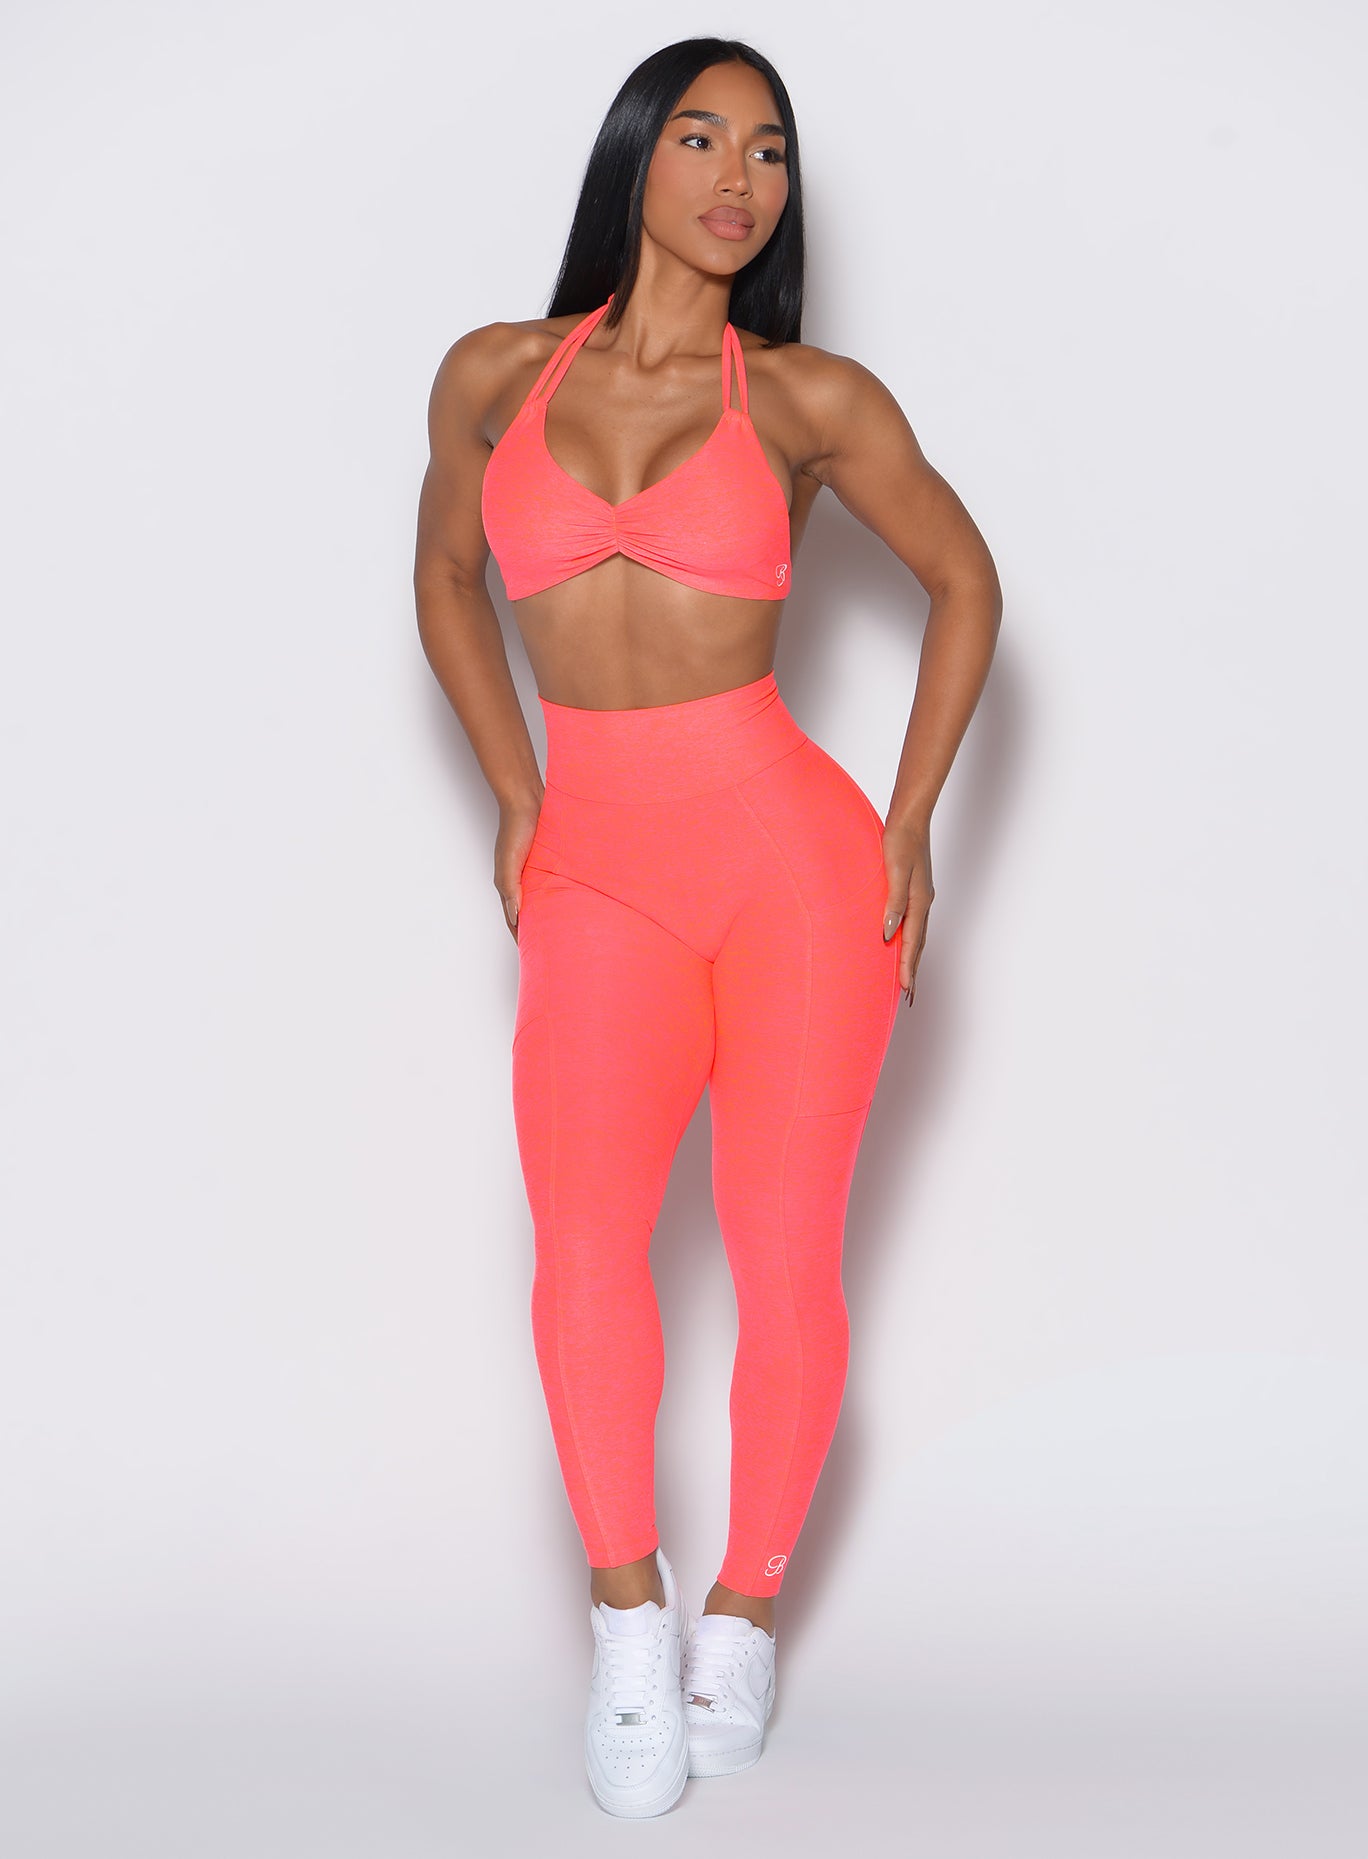 front profile picture of a model wearing our curves leggings in Neon Apricot Pink color along with the matching sports bra